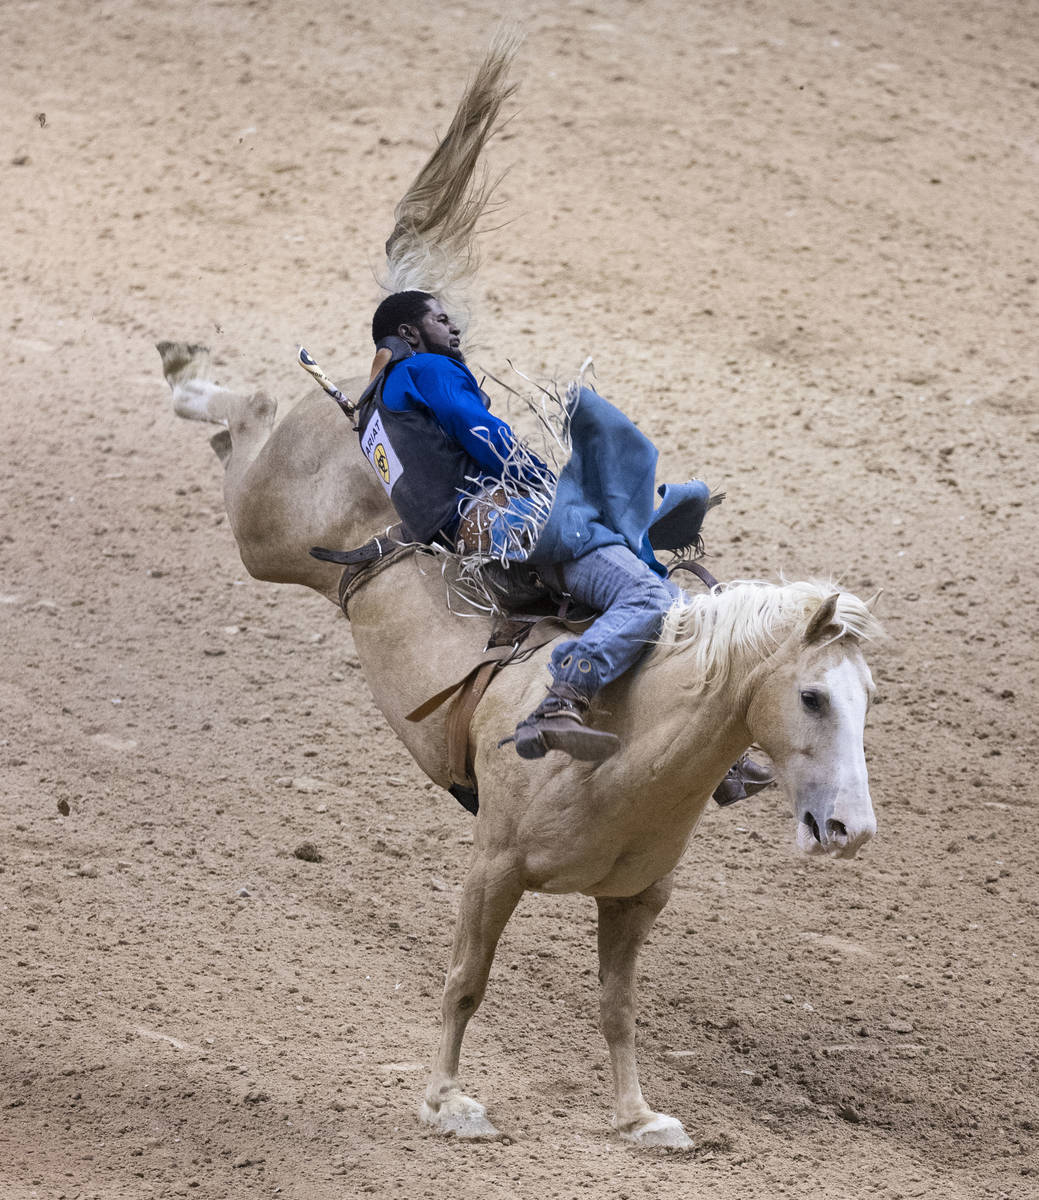 Tre Hosley, of Compton, Calif., rides Trigger while competing in bareback riding at the Bill Pi ...